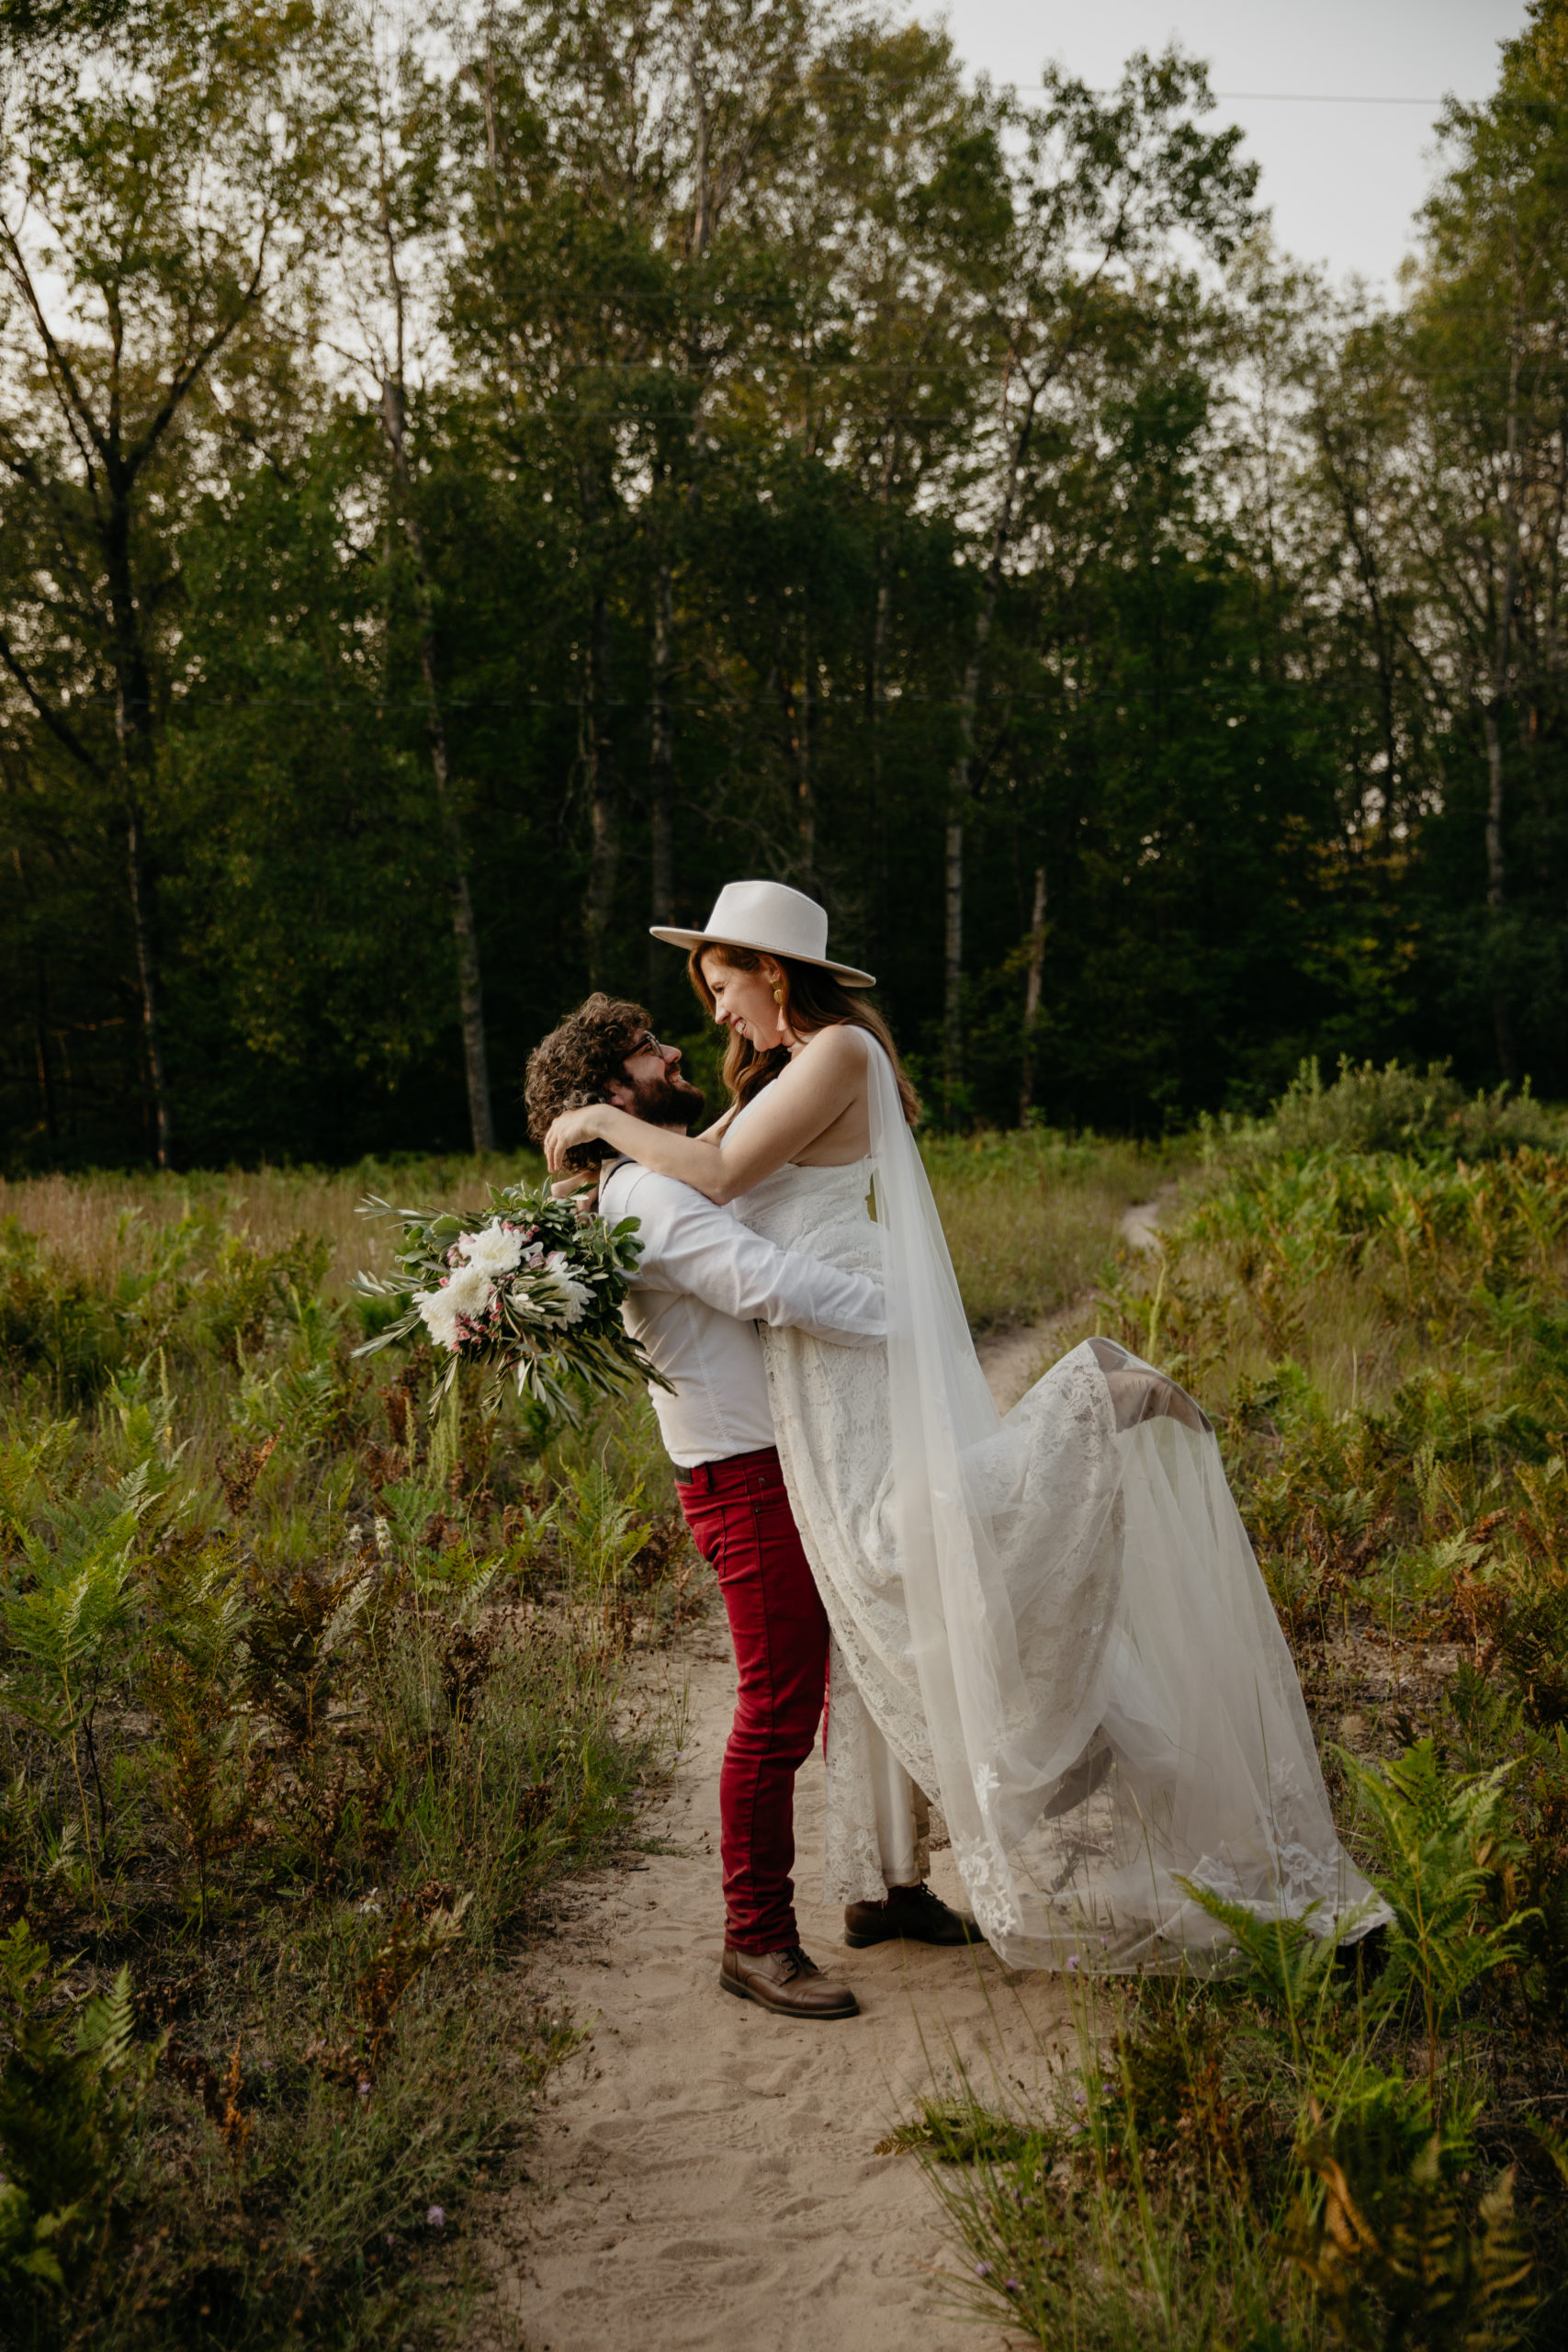 Magical Manistee Forest Elopement in Michigan // A fairytale elopement dream